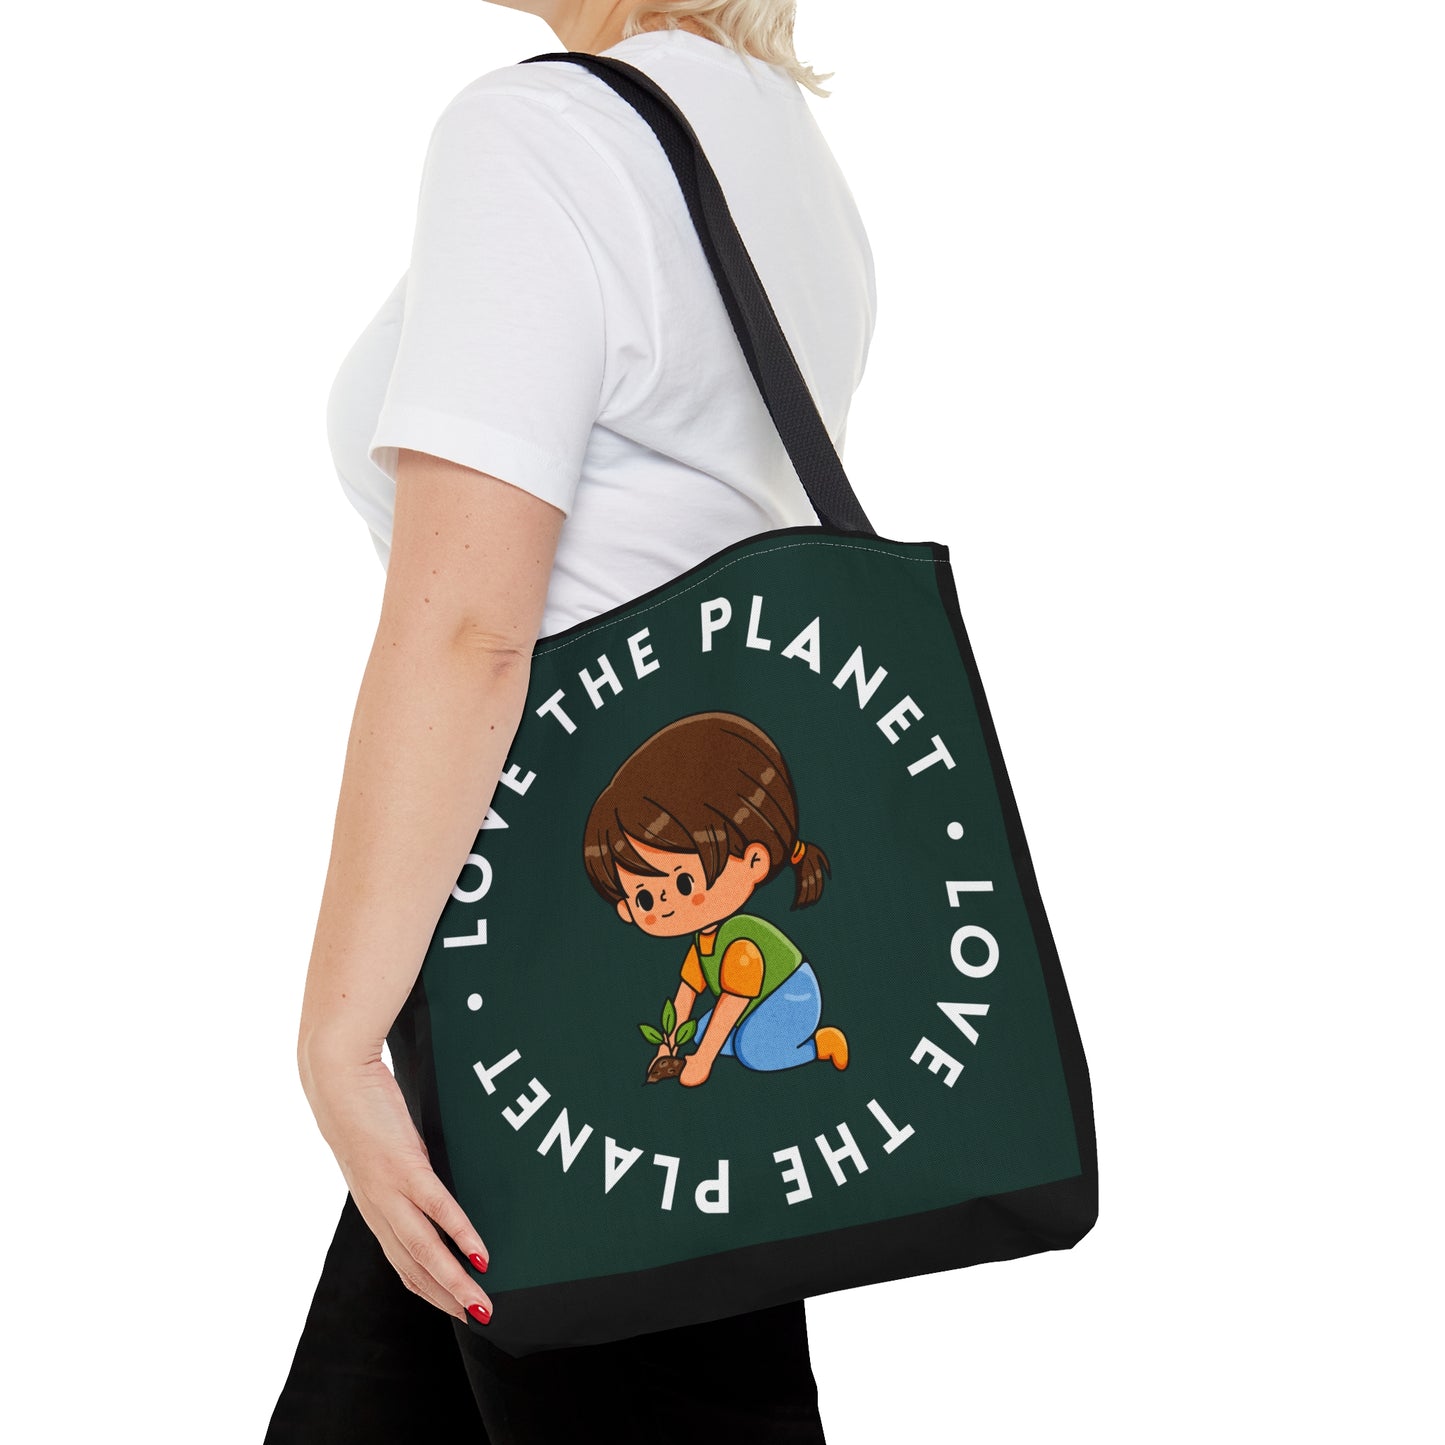 Caring kid planting a tree inside a  “LOVE THE PLANET” Tote Bag in 3 sizes to meet your needs. Available in black.